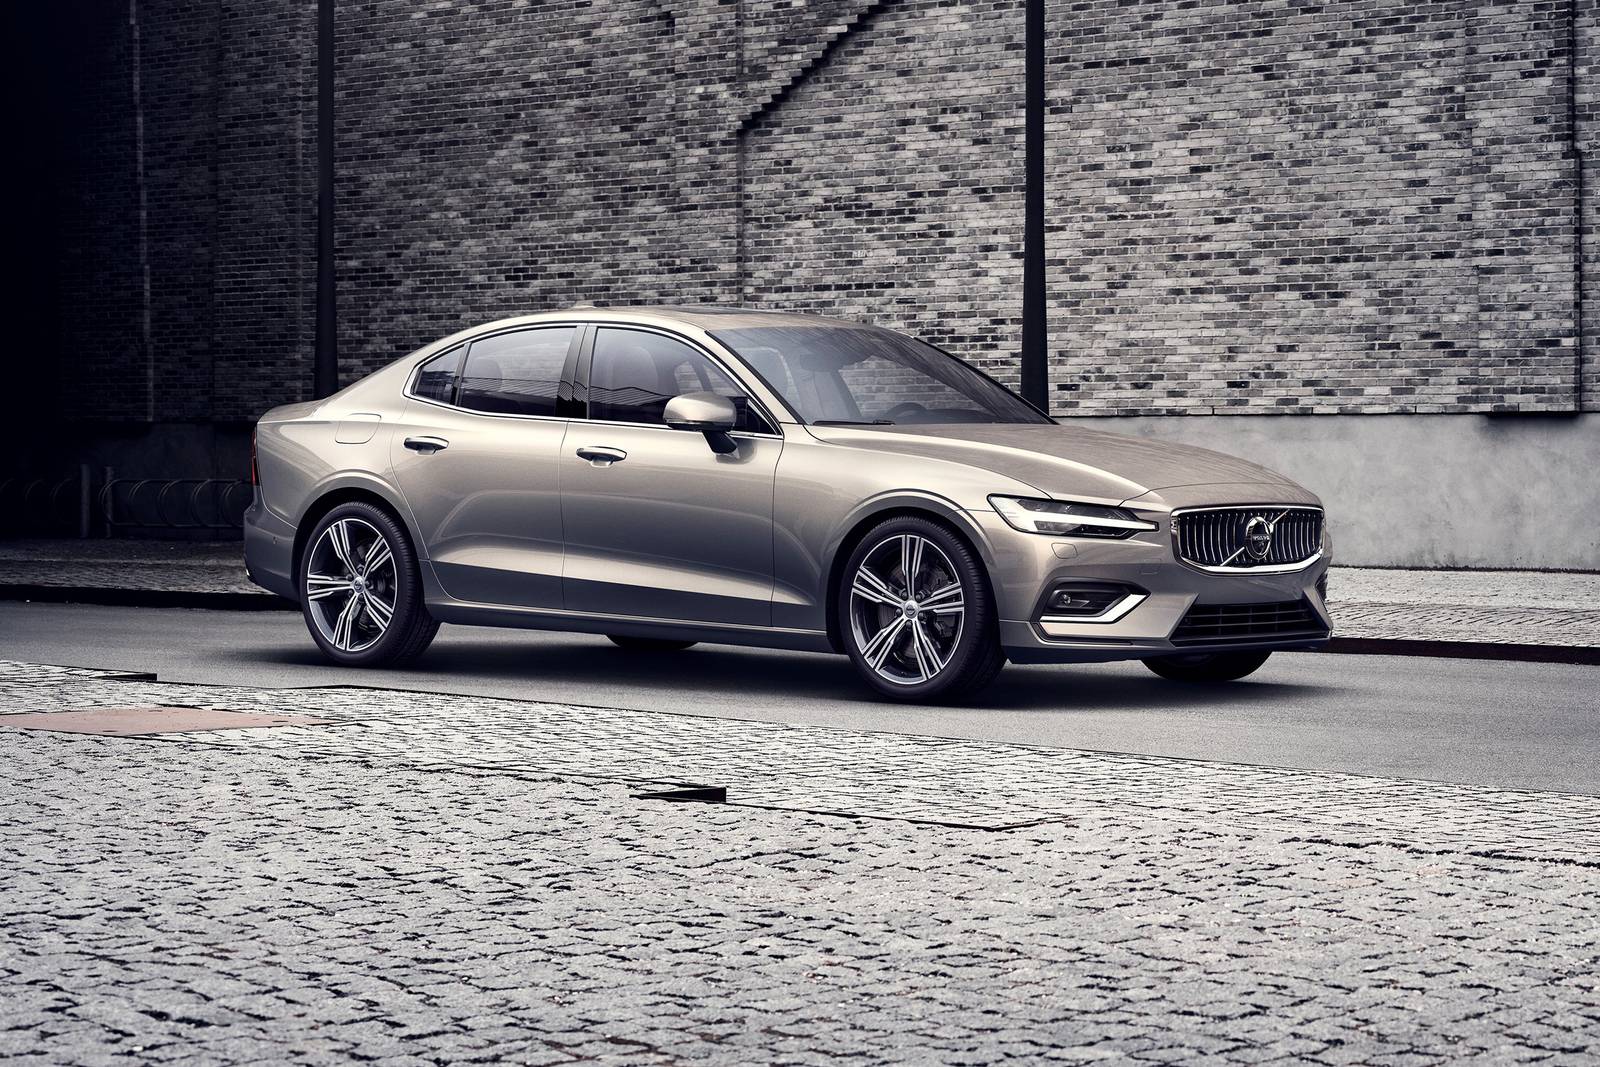 2019 Volvo S60 Review & Ratings | Edmunds